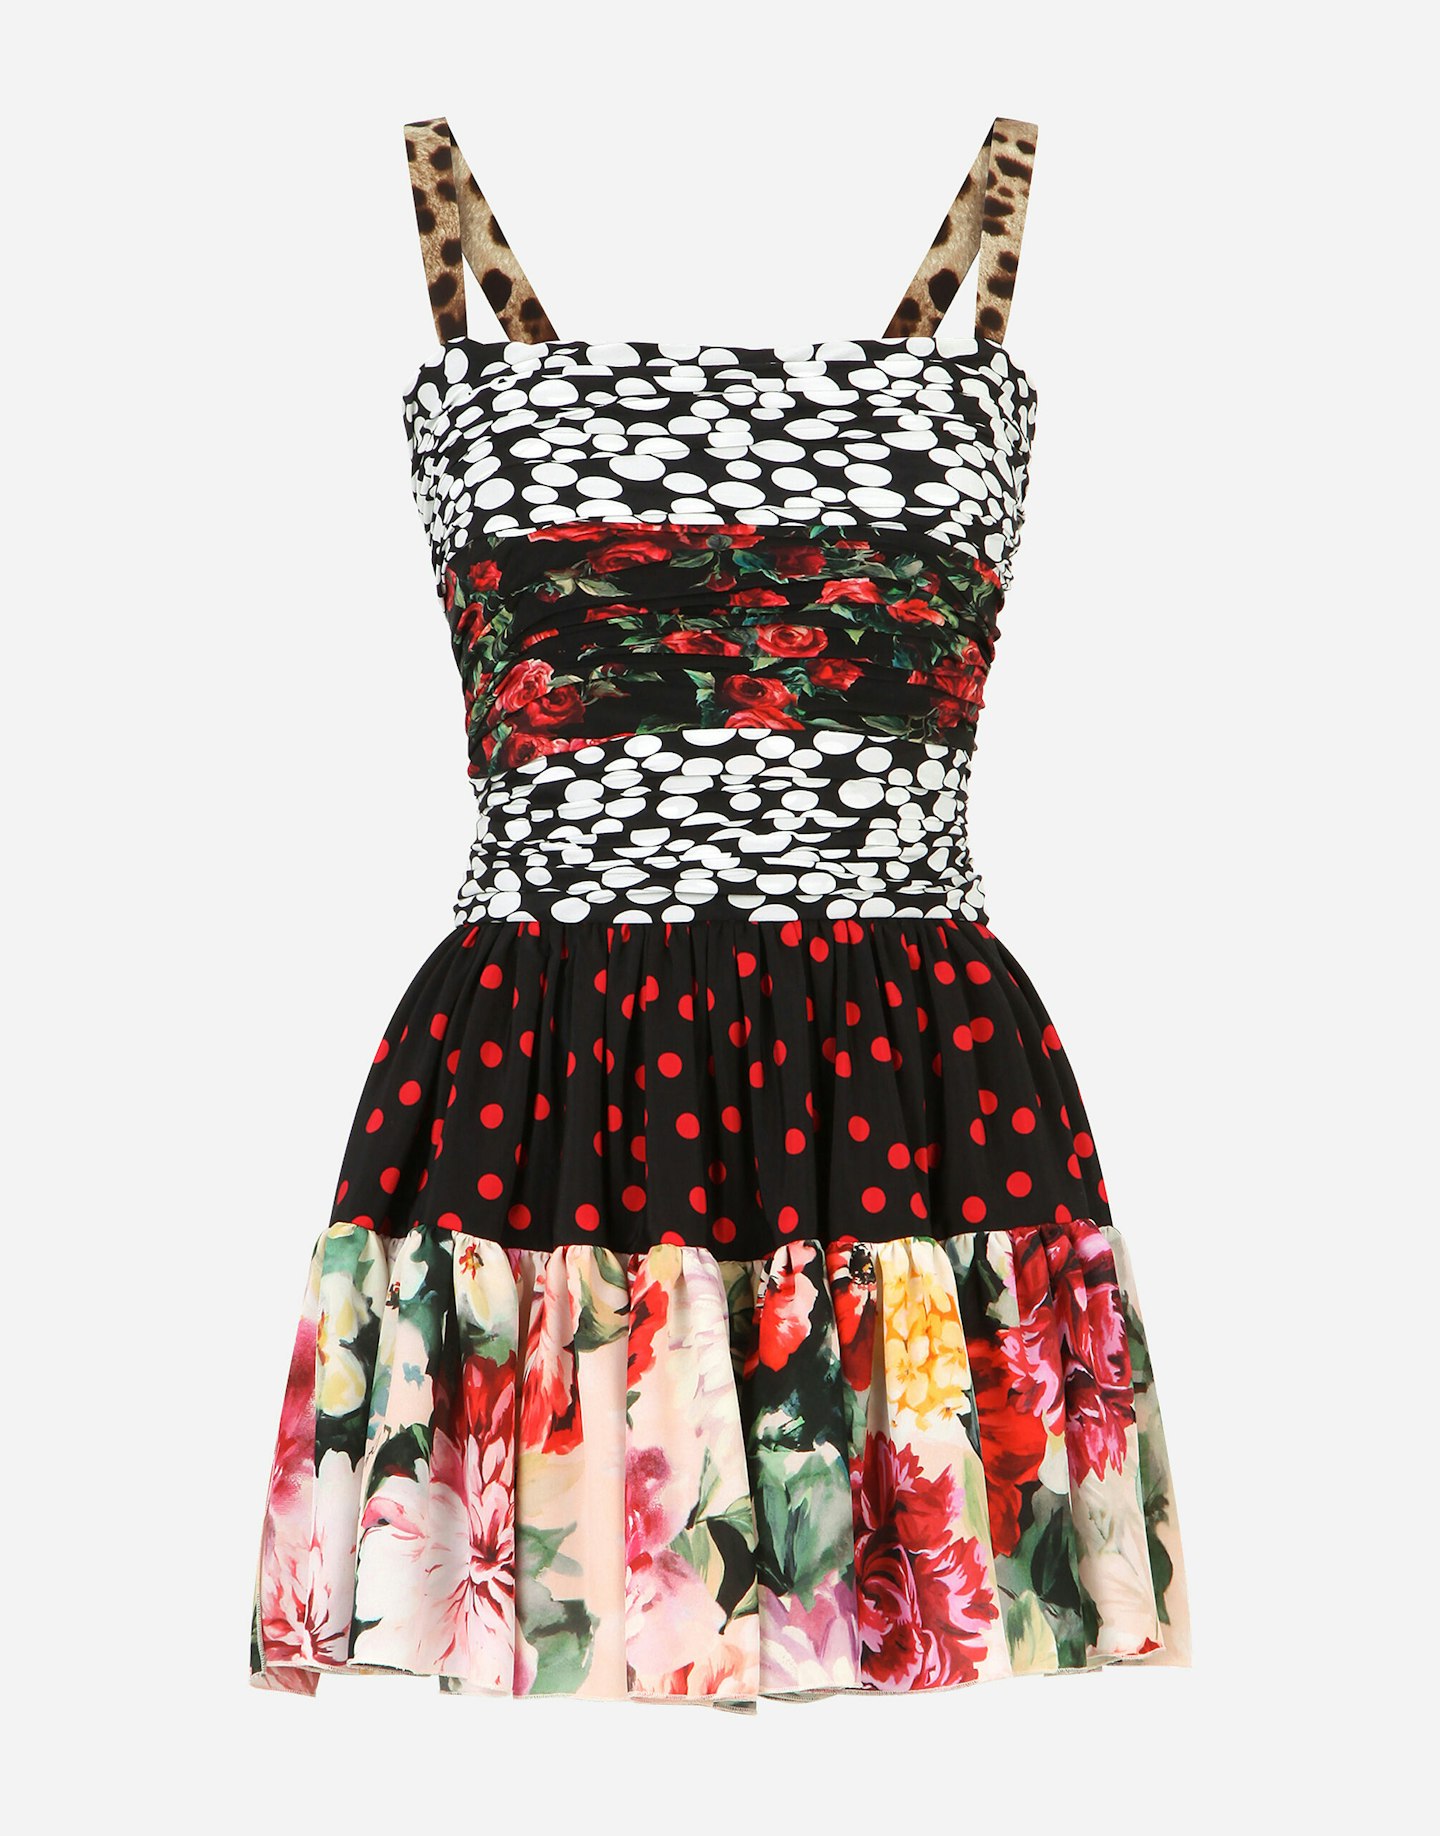 Dolce & Gabbana, Short Patchwork Crepe-De-Chine And Charmeuse Dress, £1,750